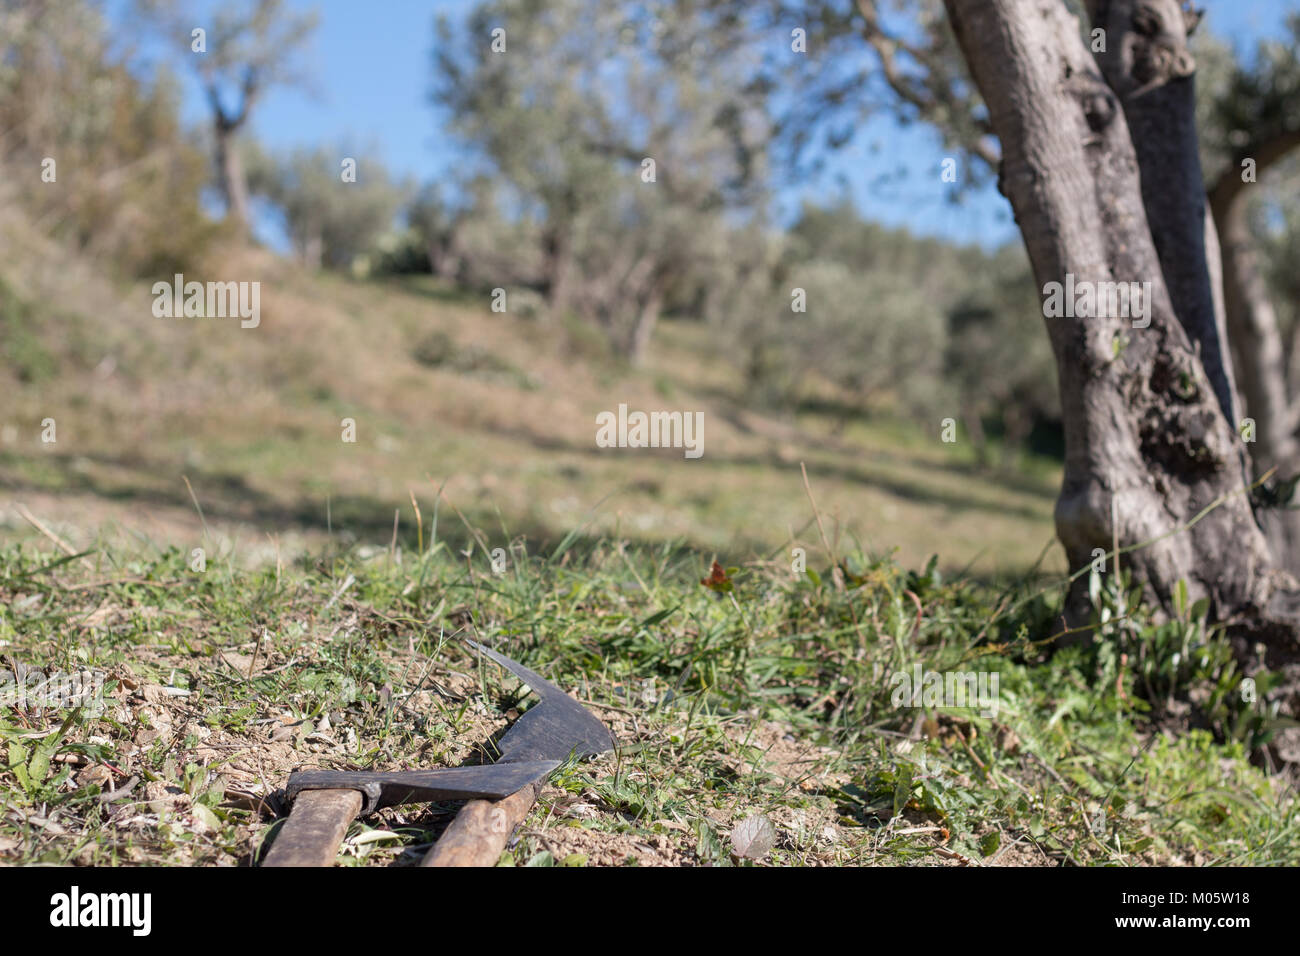 Agricultural hand tools on ground in olive orchard, shallow focus. Calabria, Italy. Stock Photo